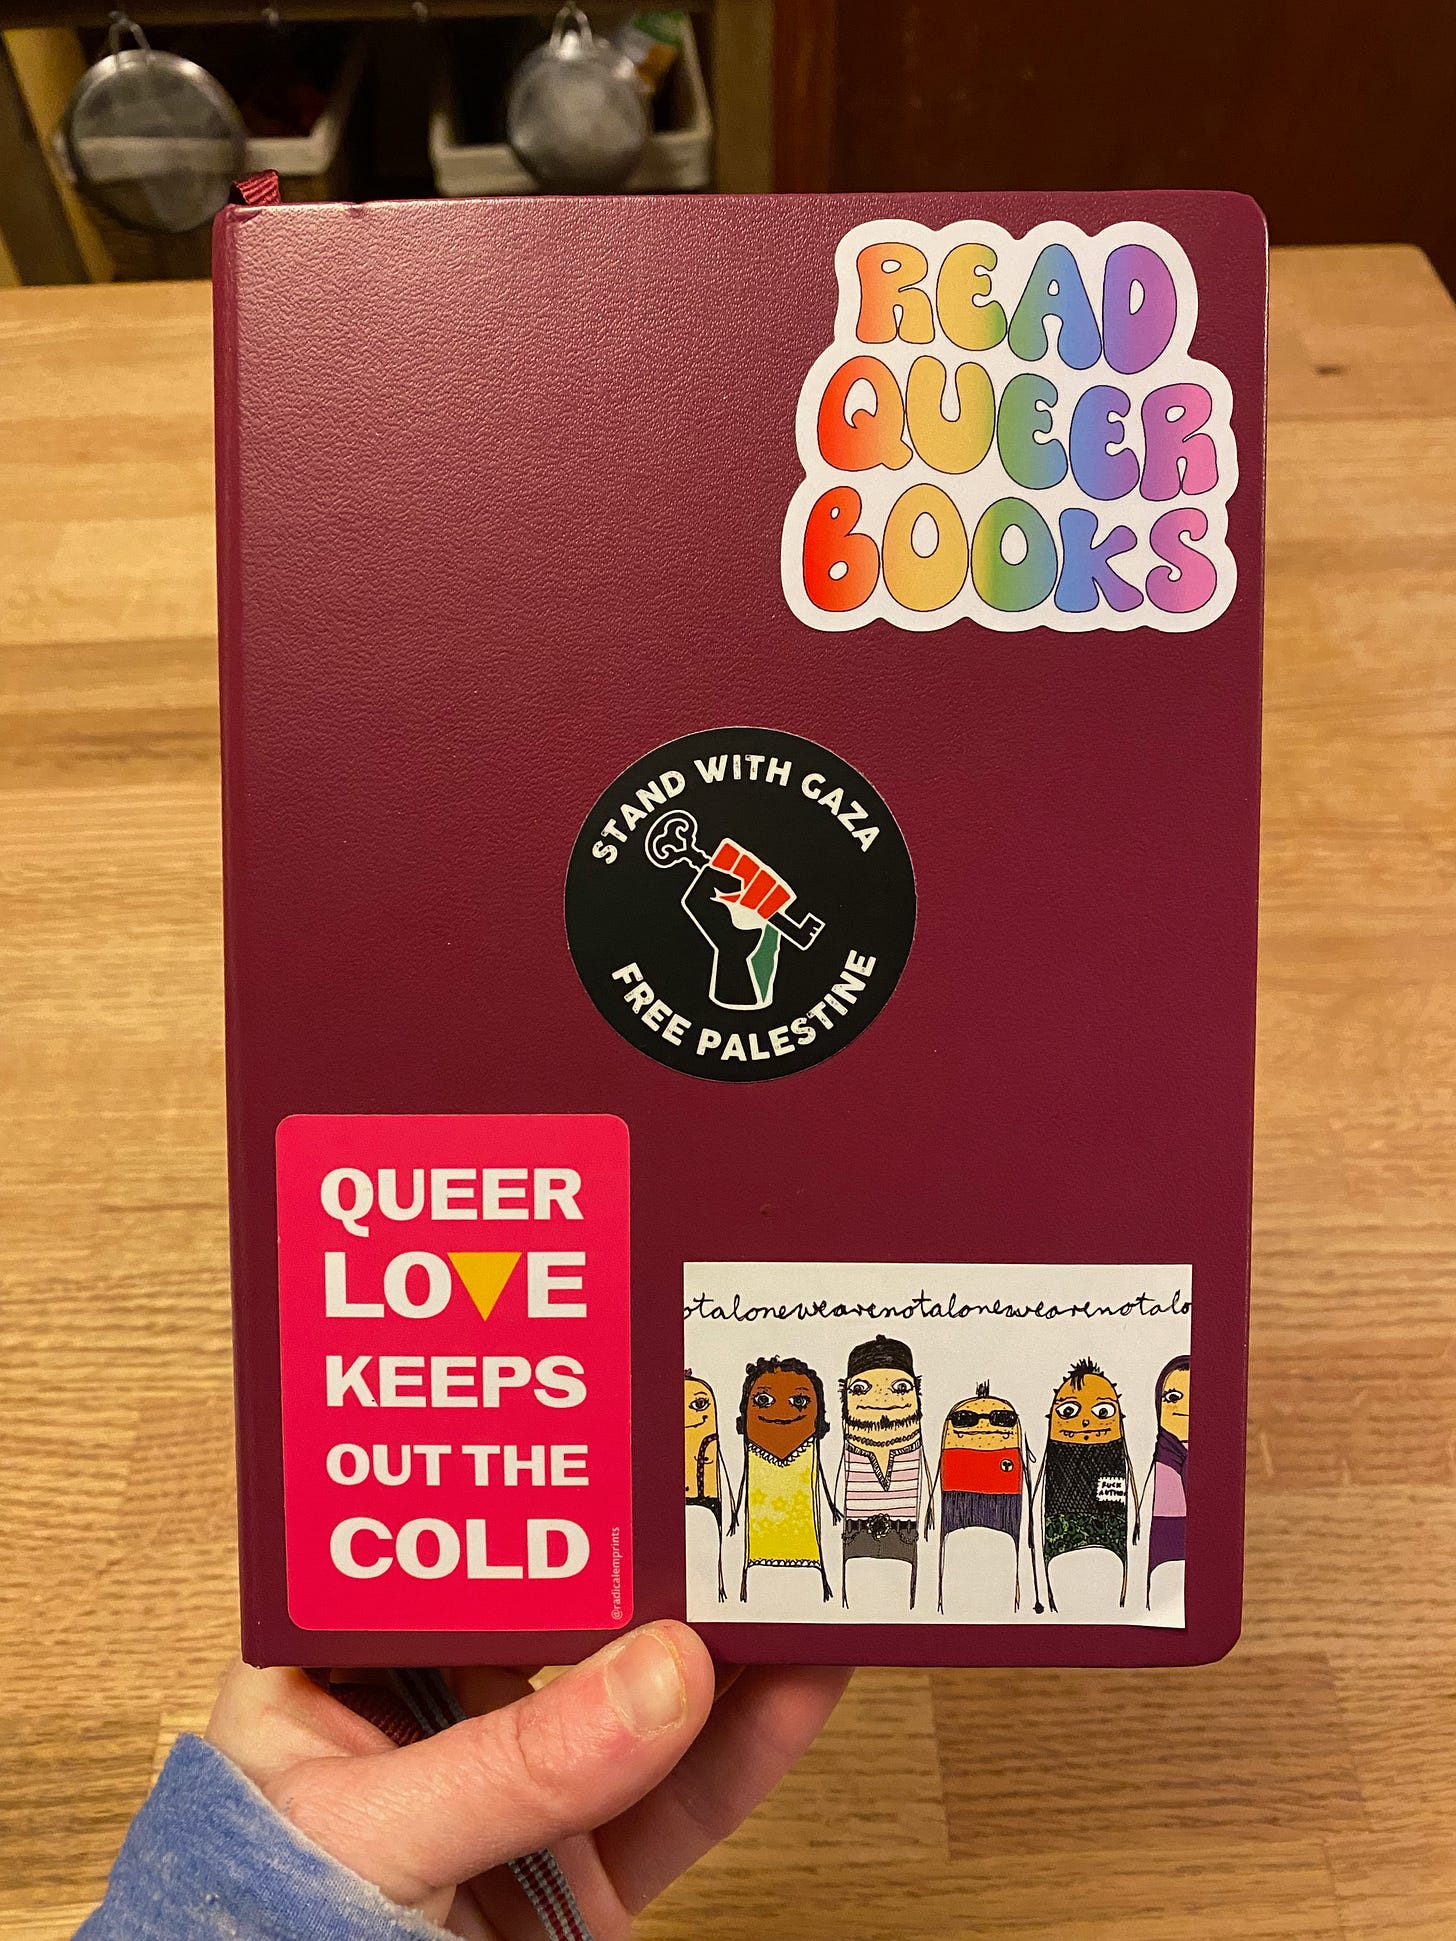 A red planner covered in stickers: Read Queer books in rainbow letters; Stand with Gaza, Free Palestine; Queer Love Keeps Out the Cold in a pink rectangle; and a rectangle of whimsical people wearing colorful clothes above the repeated text: We are not alone.